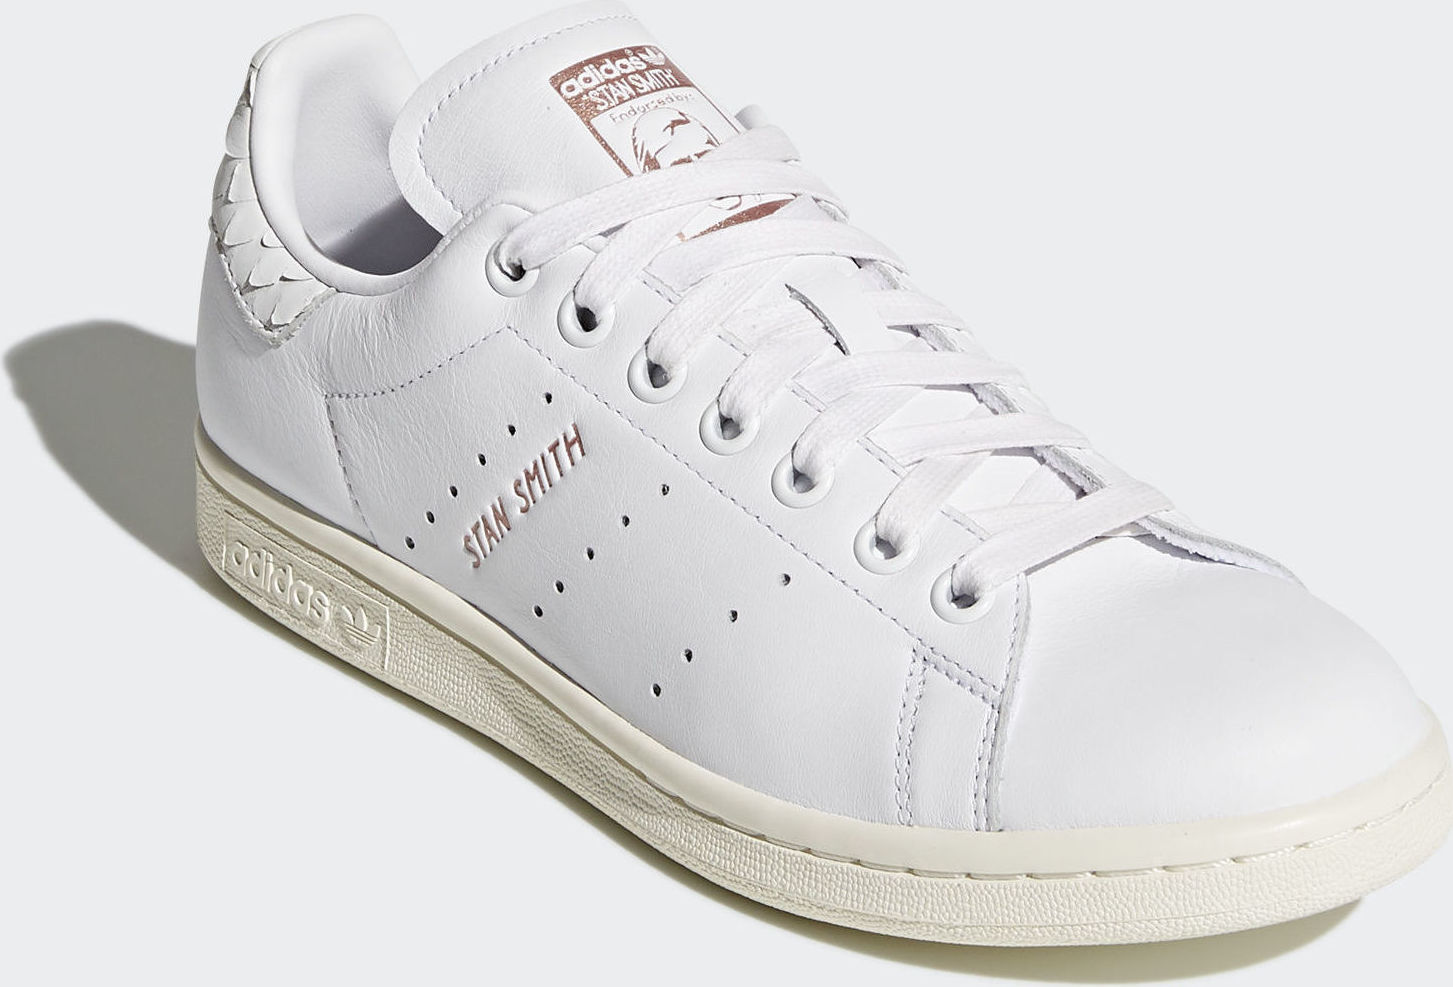 adidas originals stan smith sneakers with reptile back counter